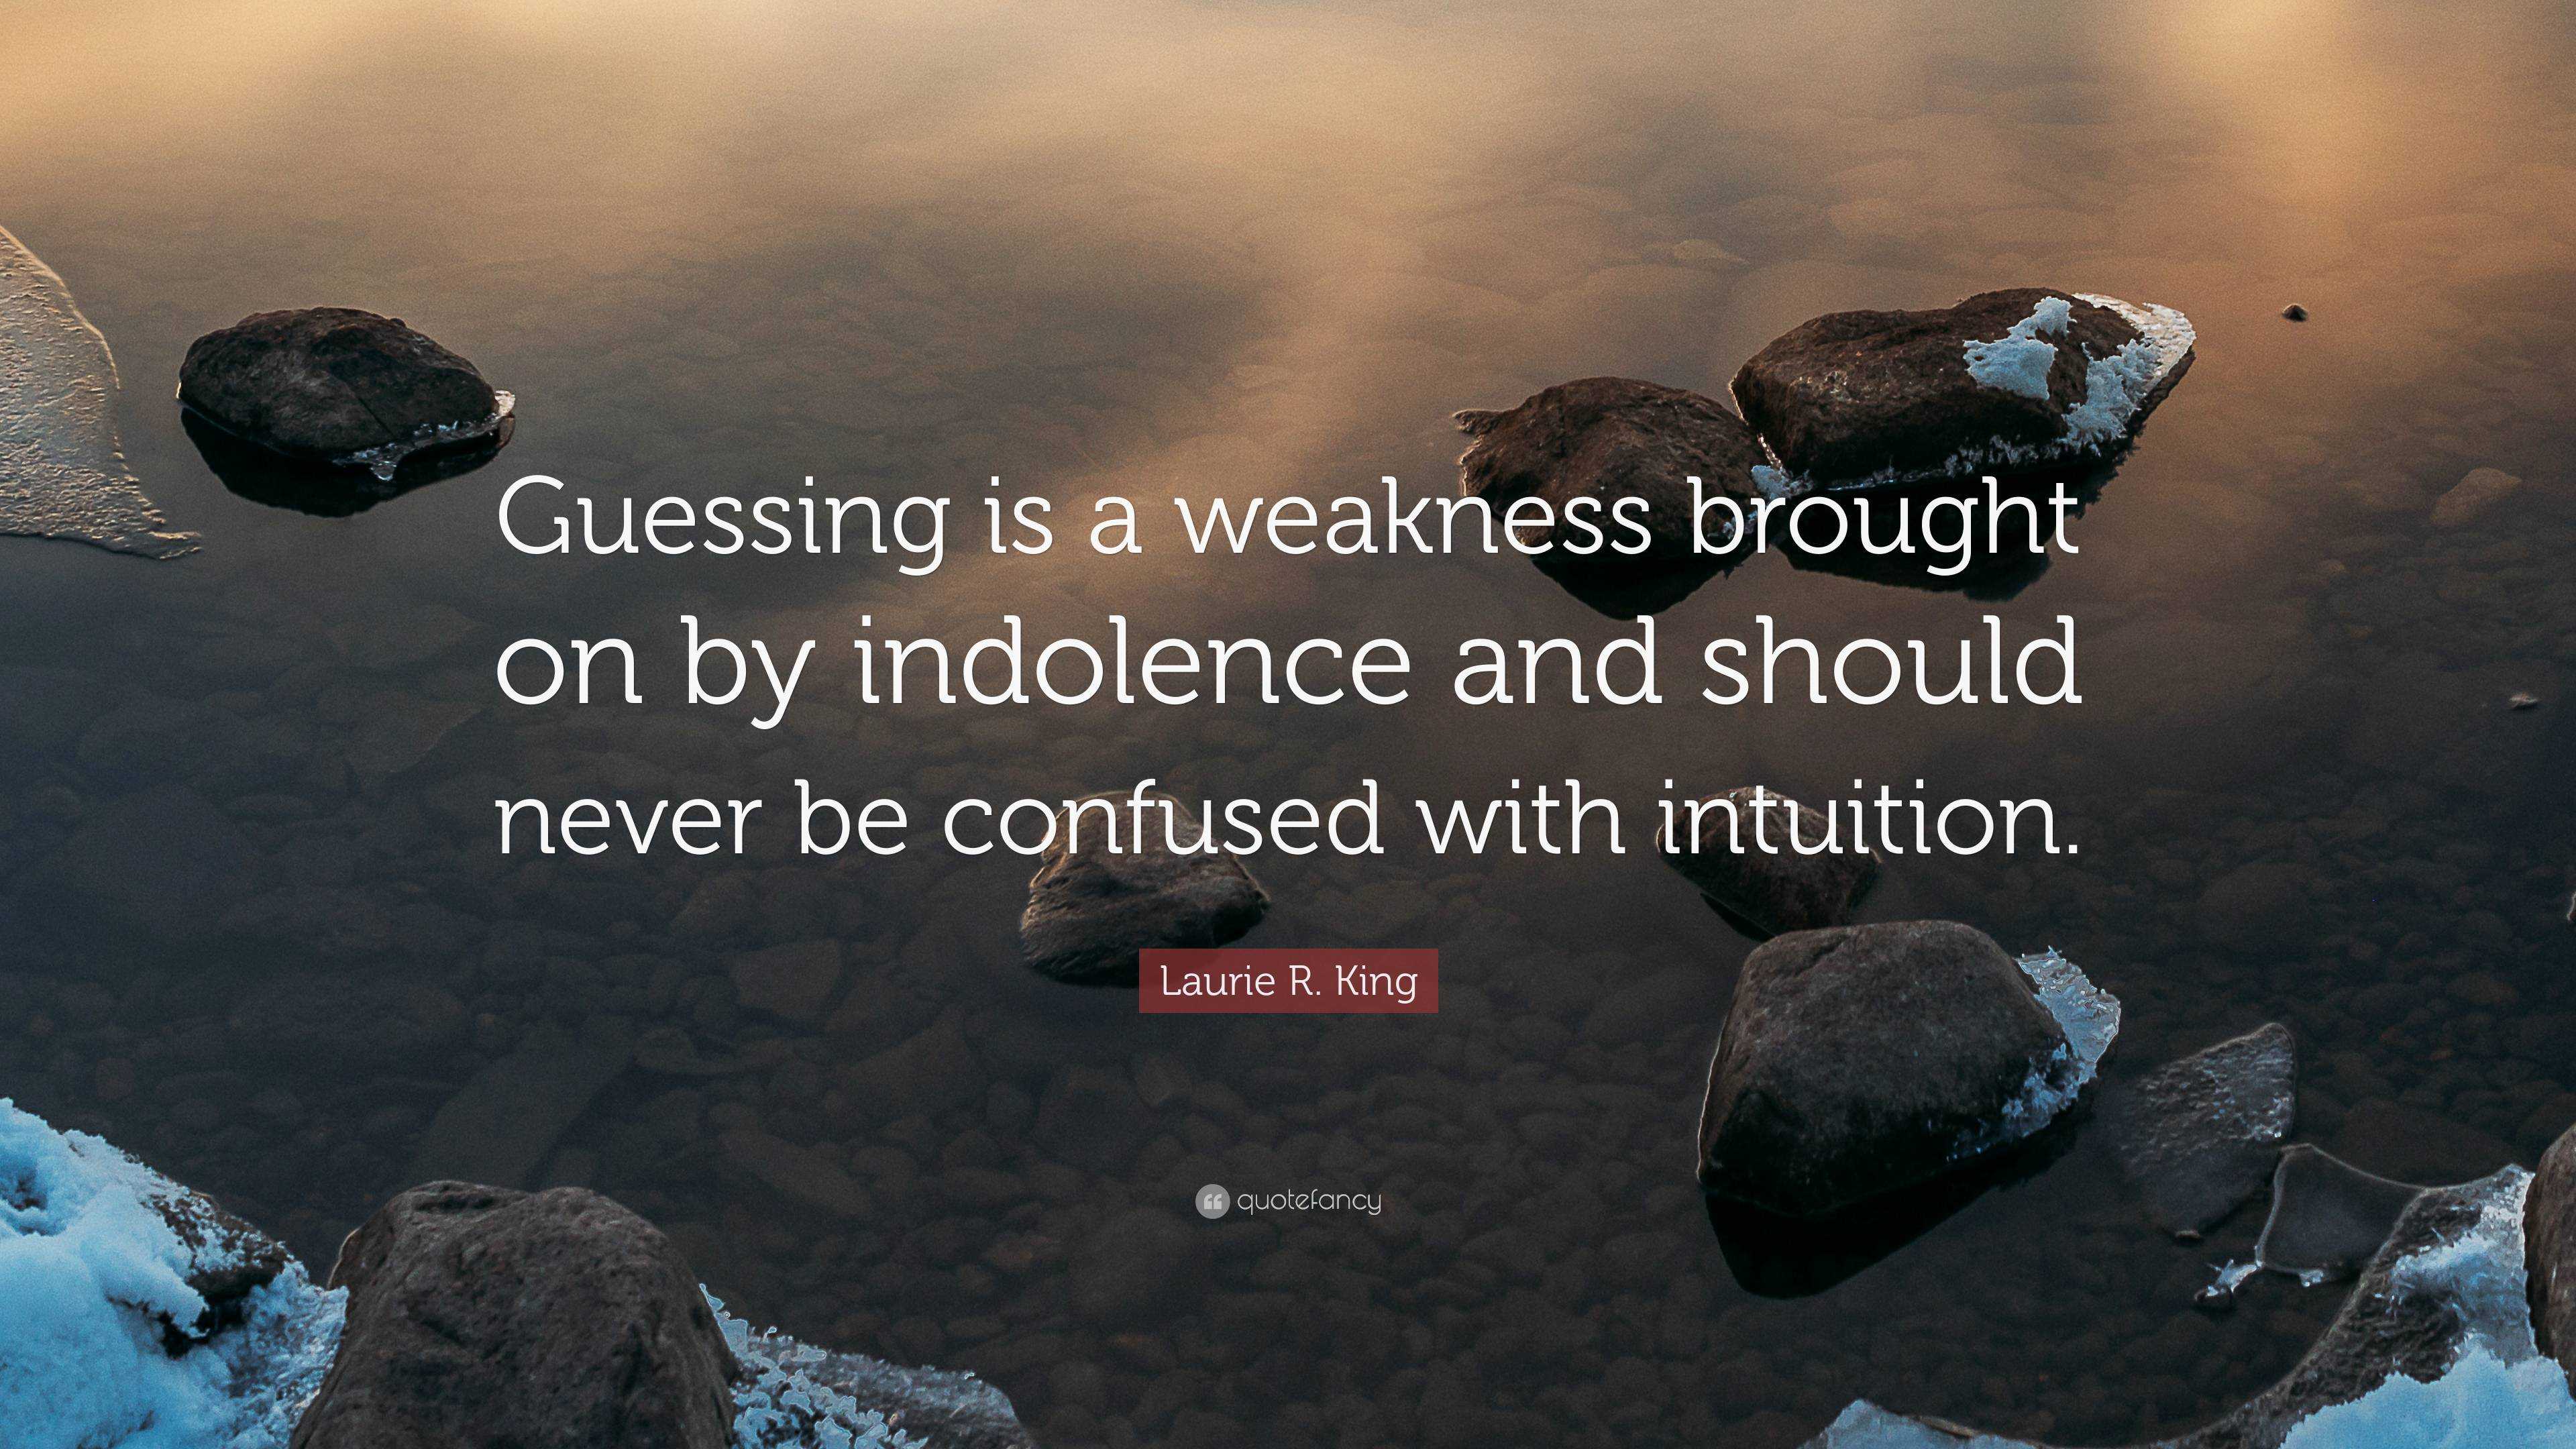 Laurie R. King Quote: “Guessing is a weakness brought on by indolence and  should never be